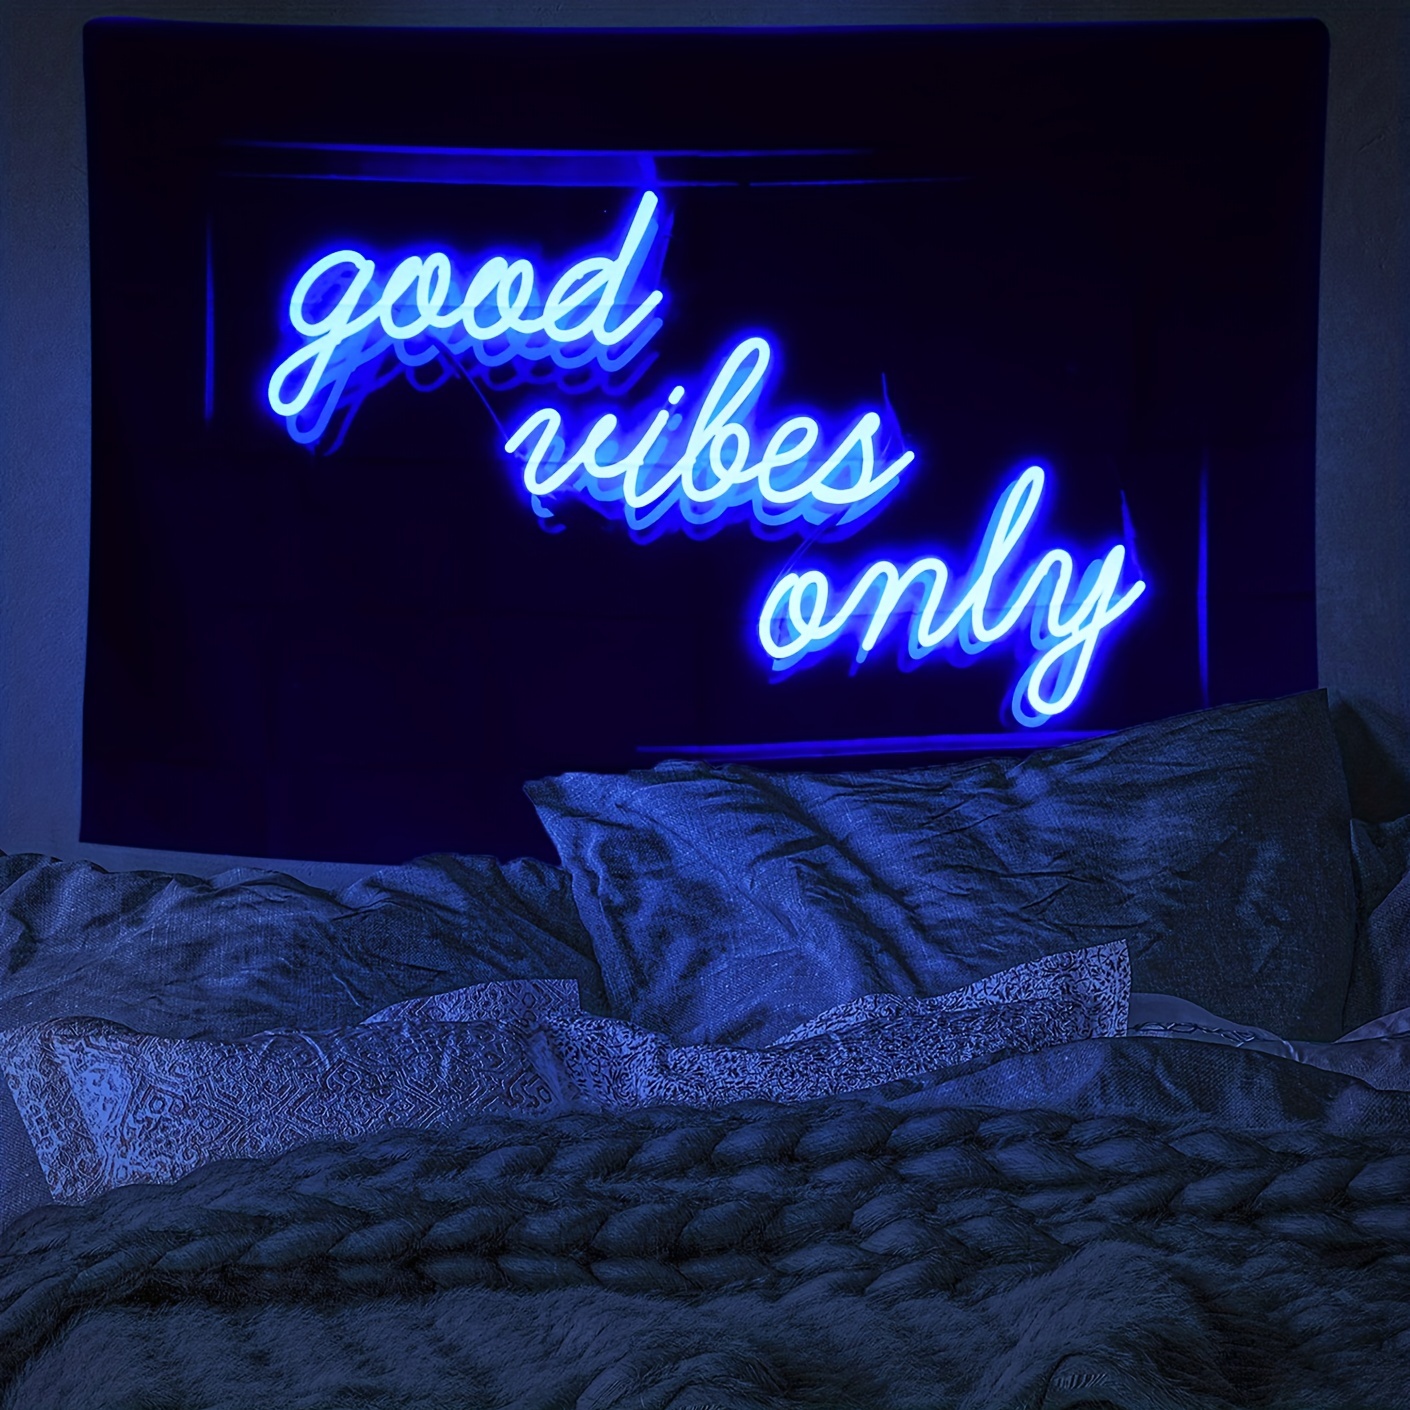 

1pc Good Vibes Only Fluorescent Tapestry, Peach Skin Velvet Tapestry, Uv Black Light Tapestry Wall Hanging For Living Room Bedroom Dorm Room Home Decor, With Free Accessories Easy To Hang